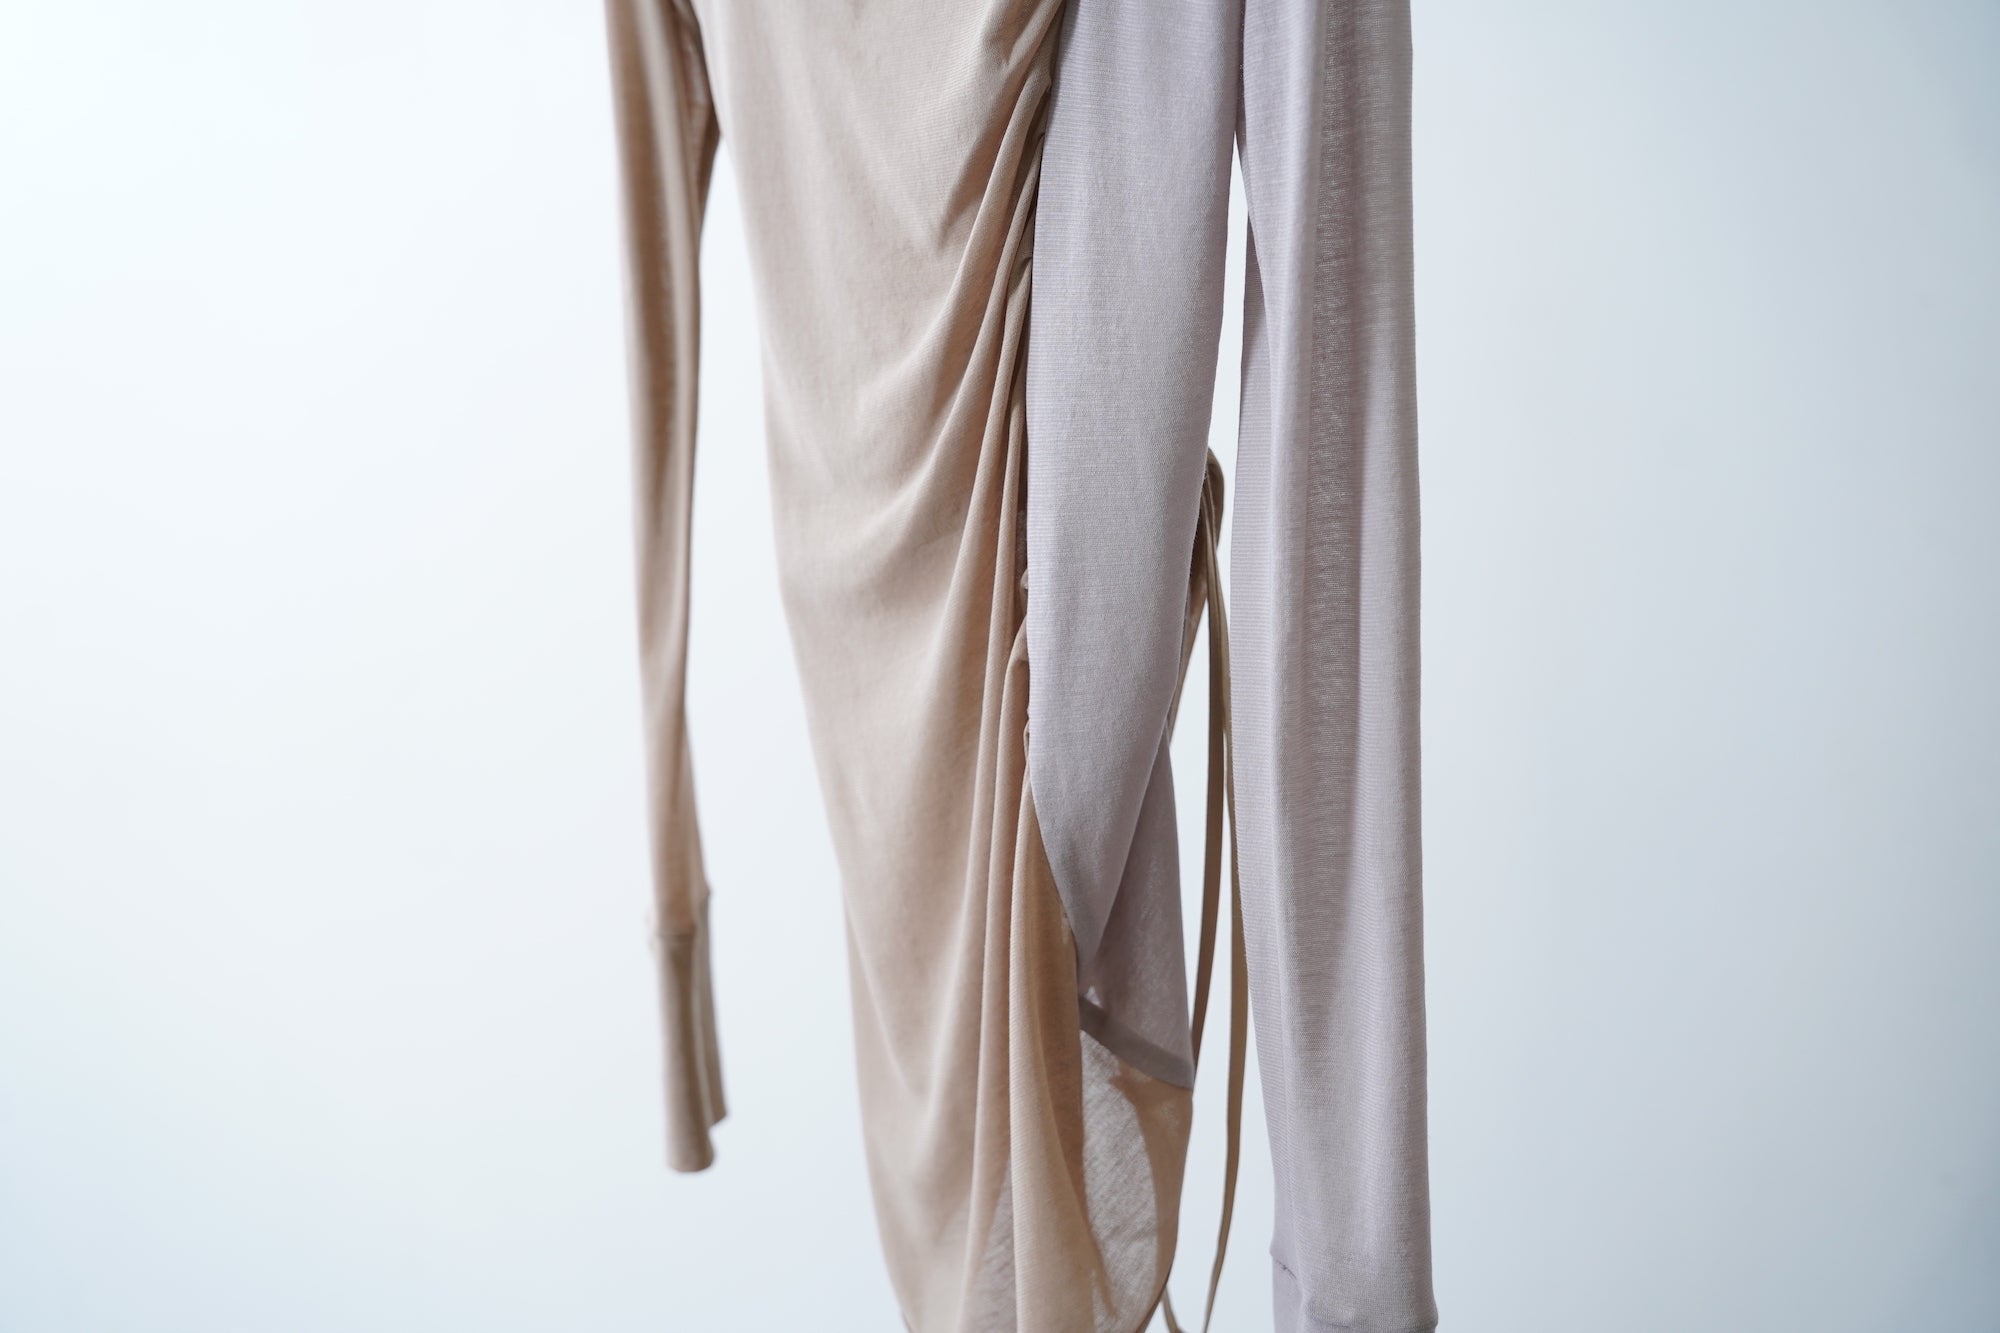 Equil Tank / beige